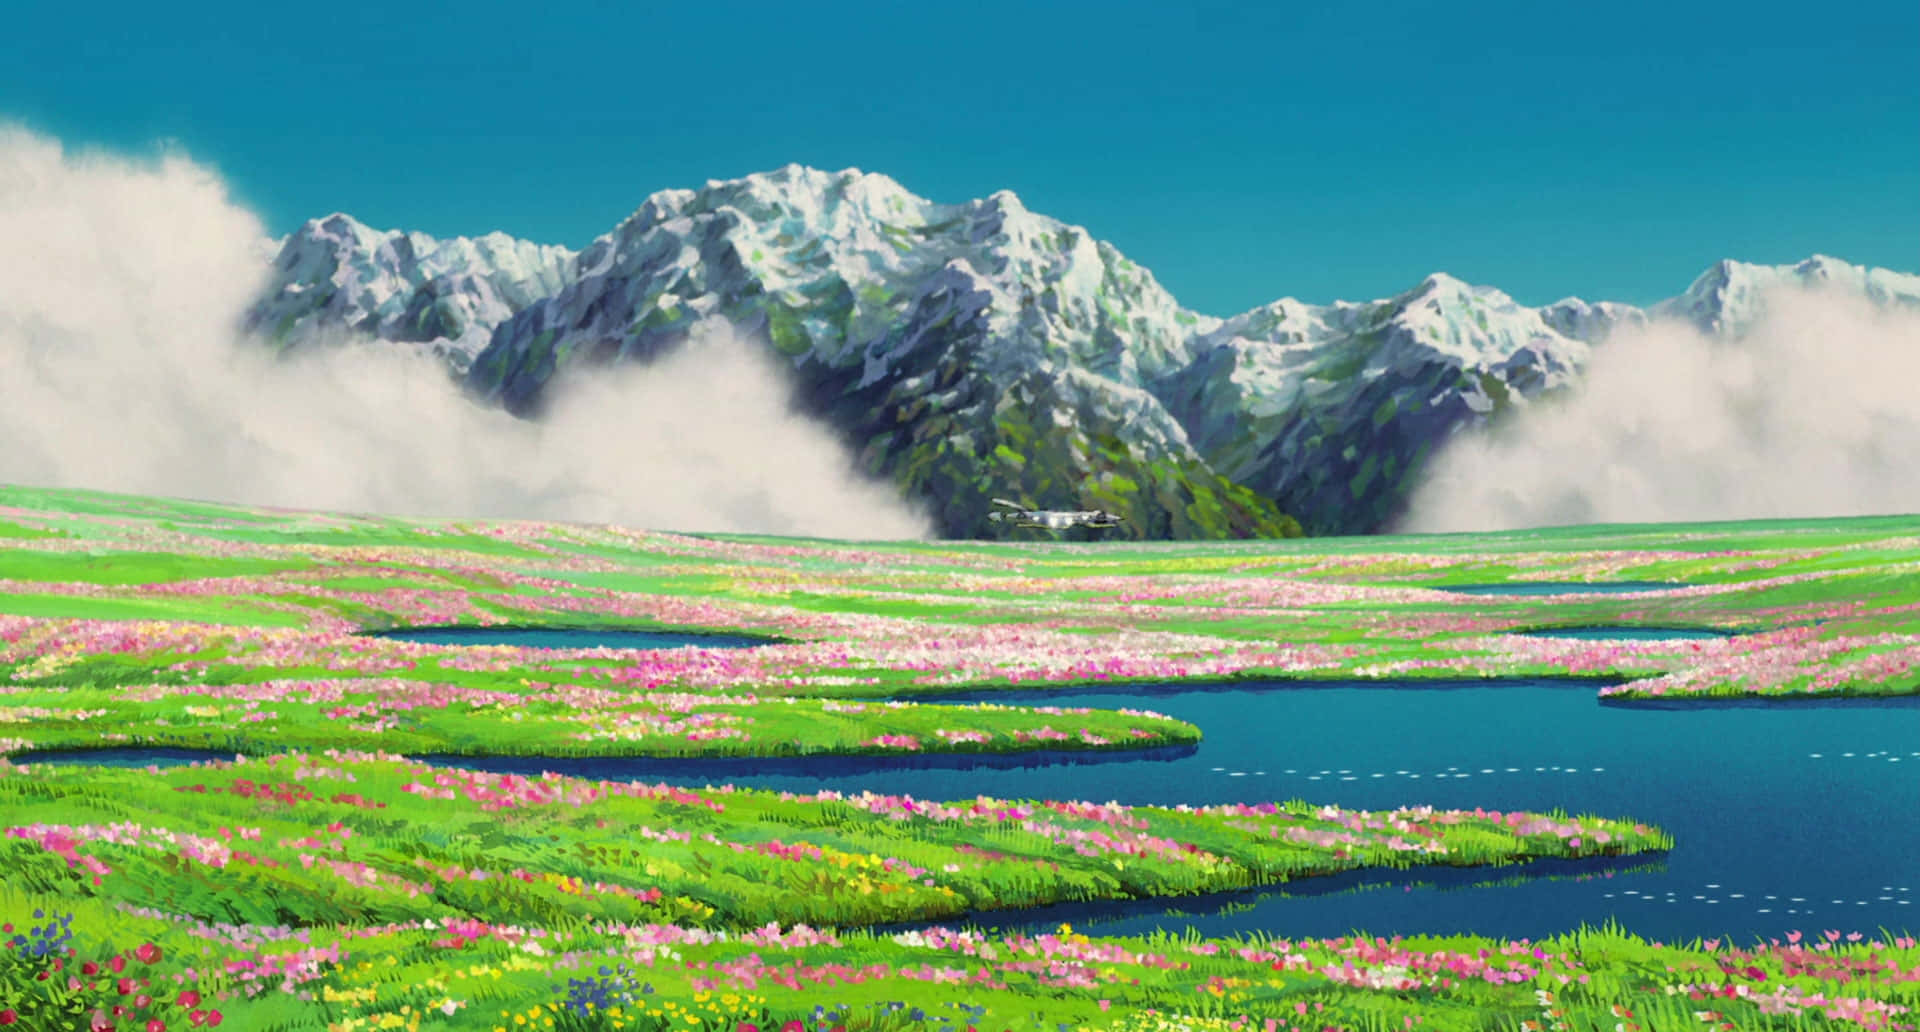 A Mountain Landscape With Flowers And Mountains